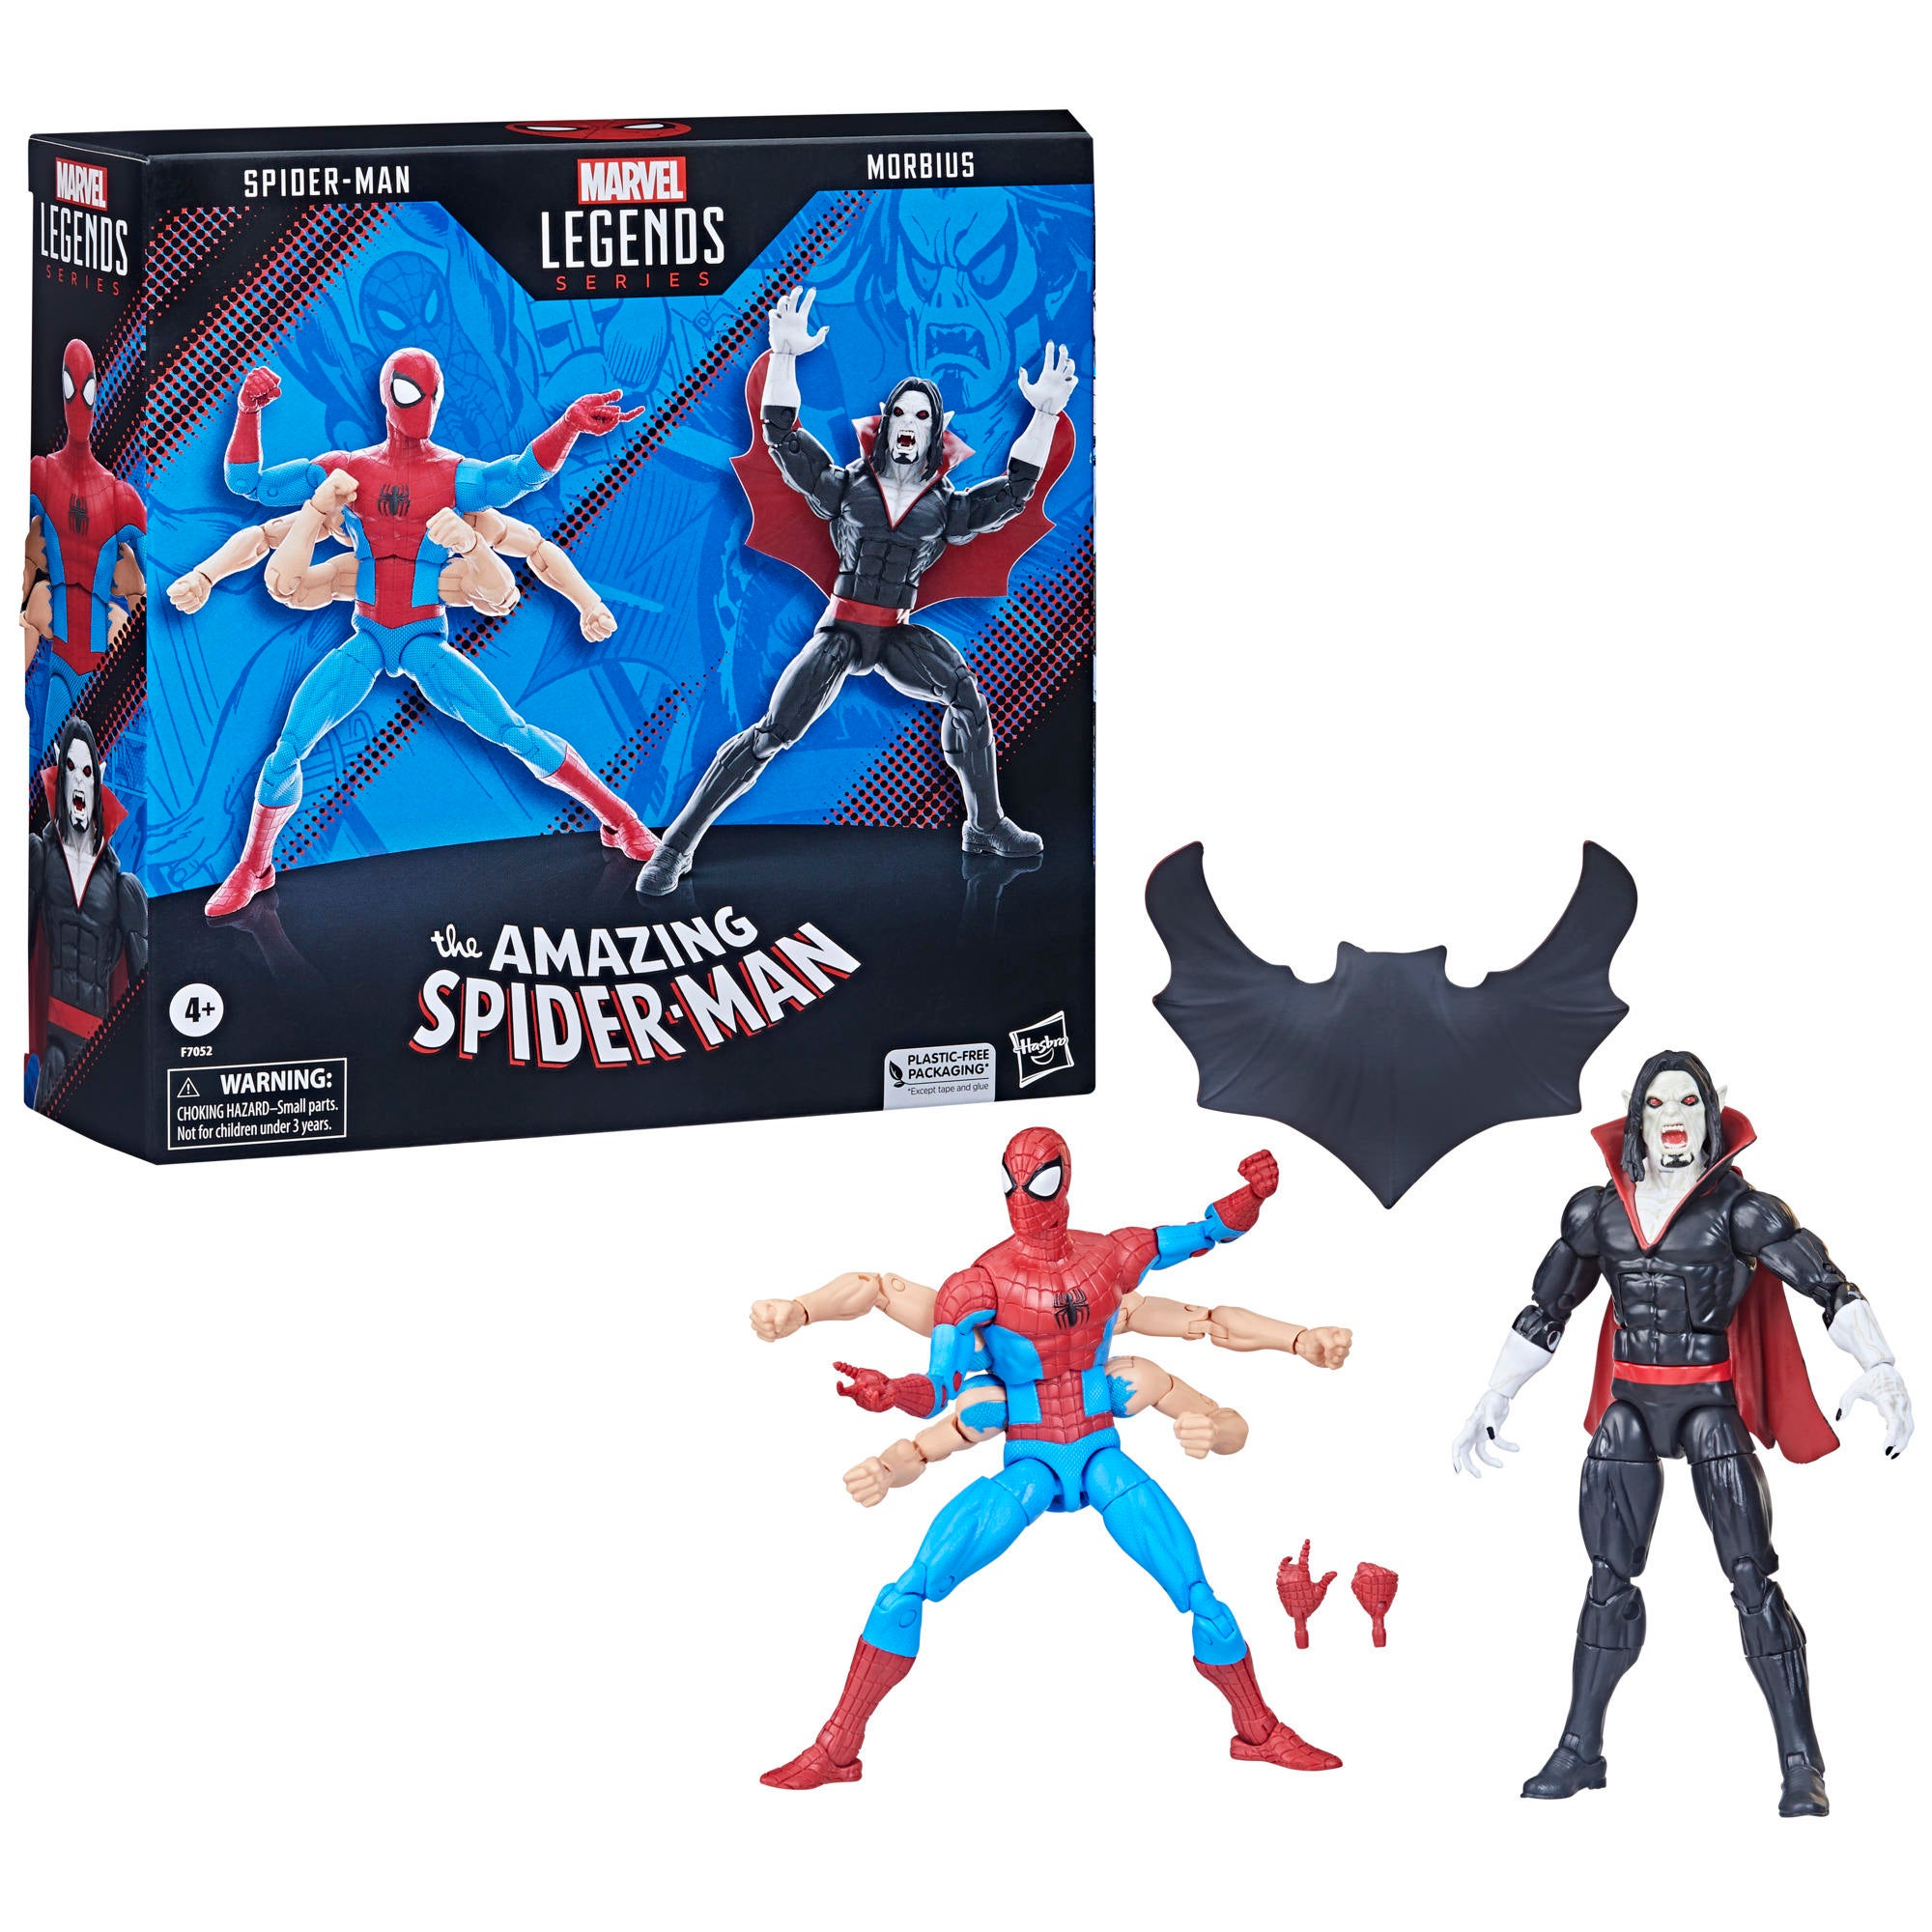 Marvel Legends Spider-Man vs Morbius 2-Pack Pre-Orders Launch at